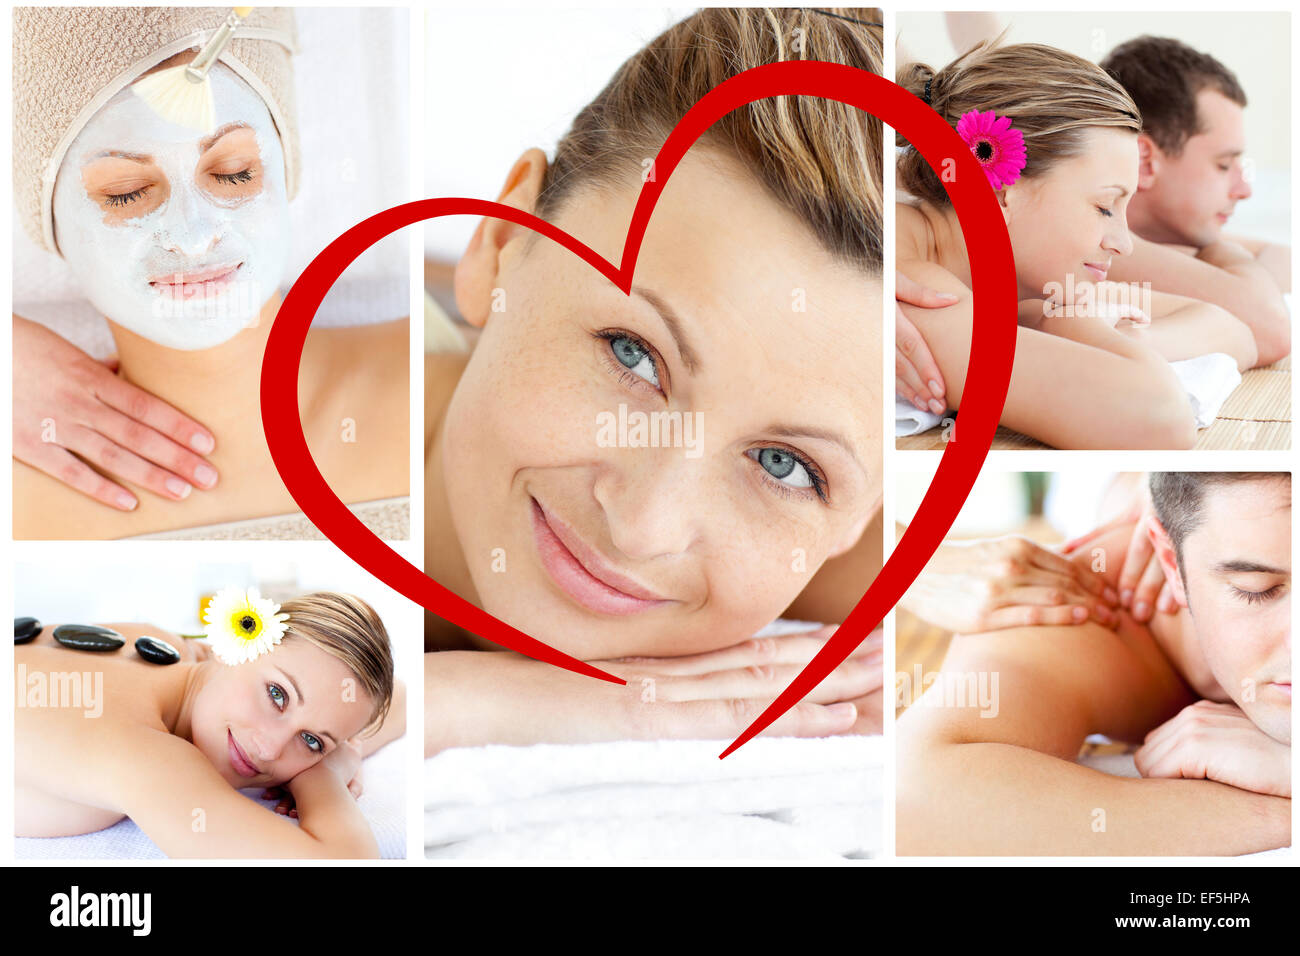 Composite image of collage of young people having relaxation treatments Stock Photo